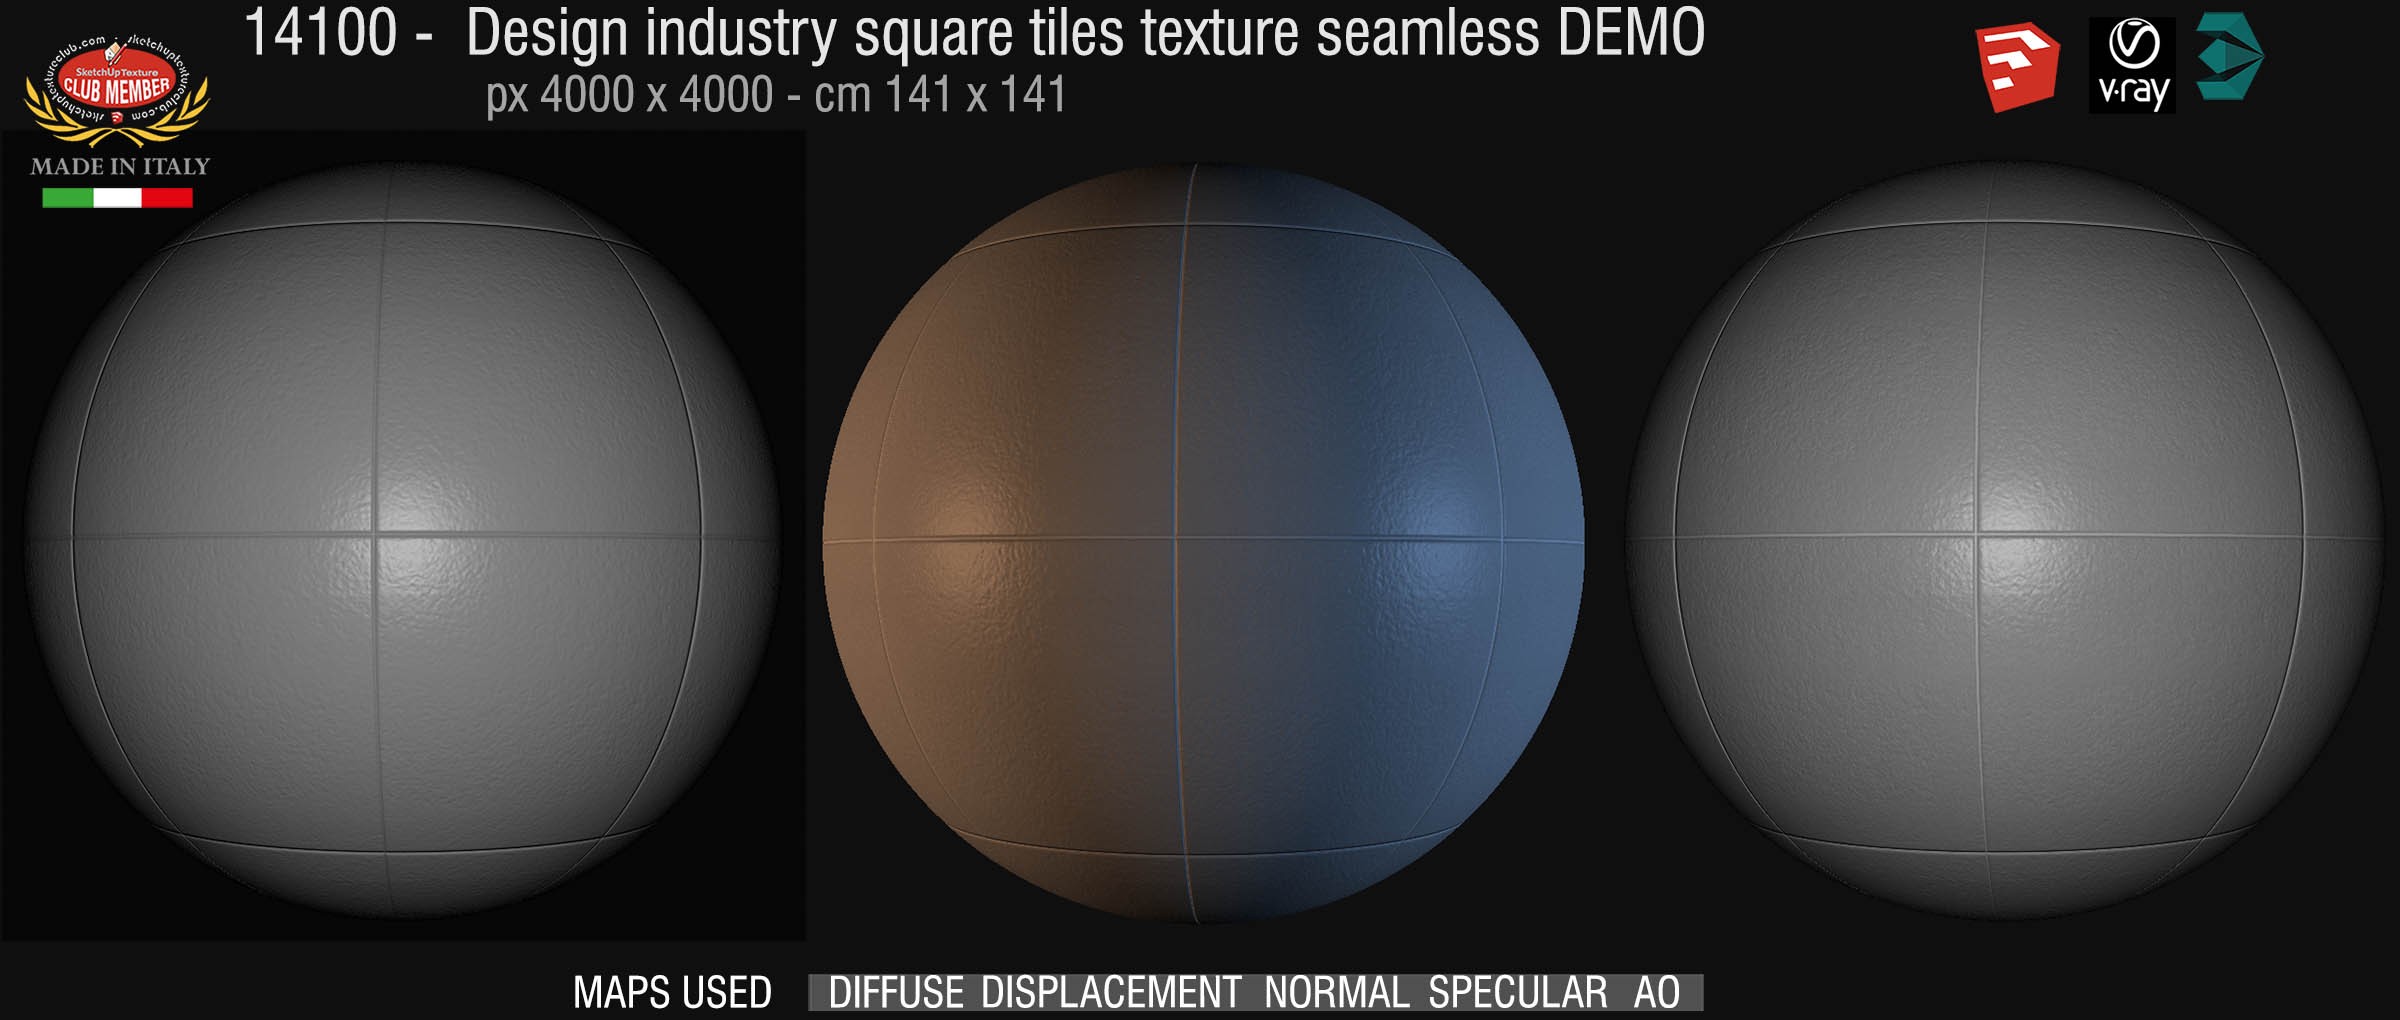 14100 Design industry square tile texture seamless + maps DEMO